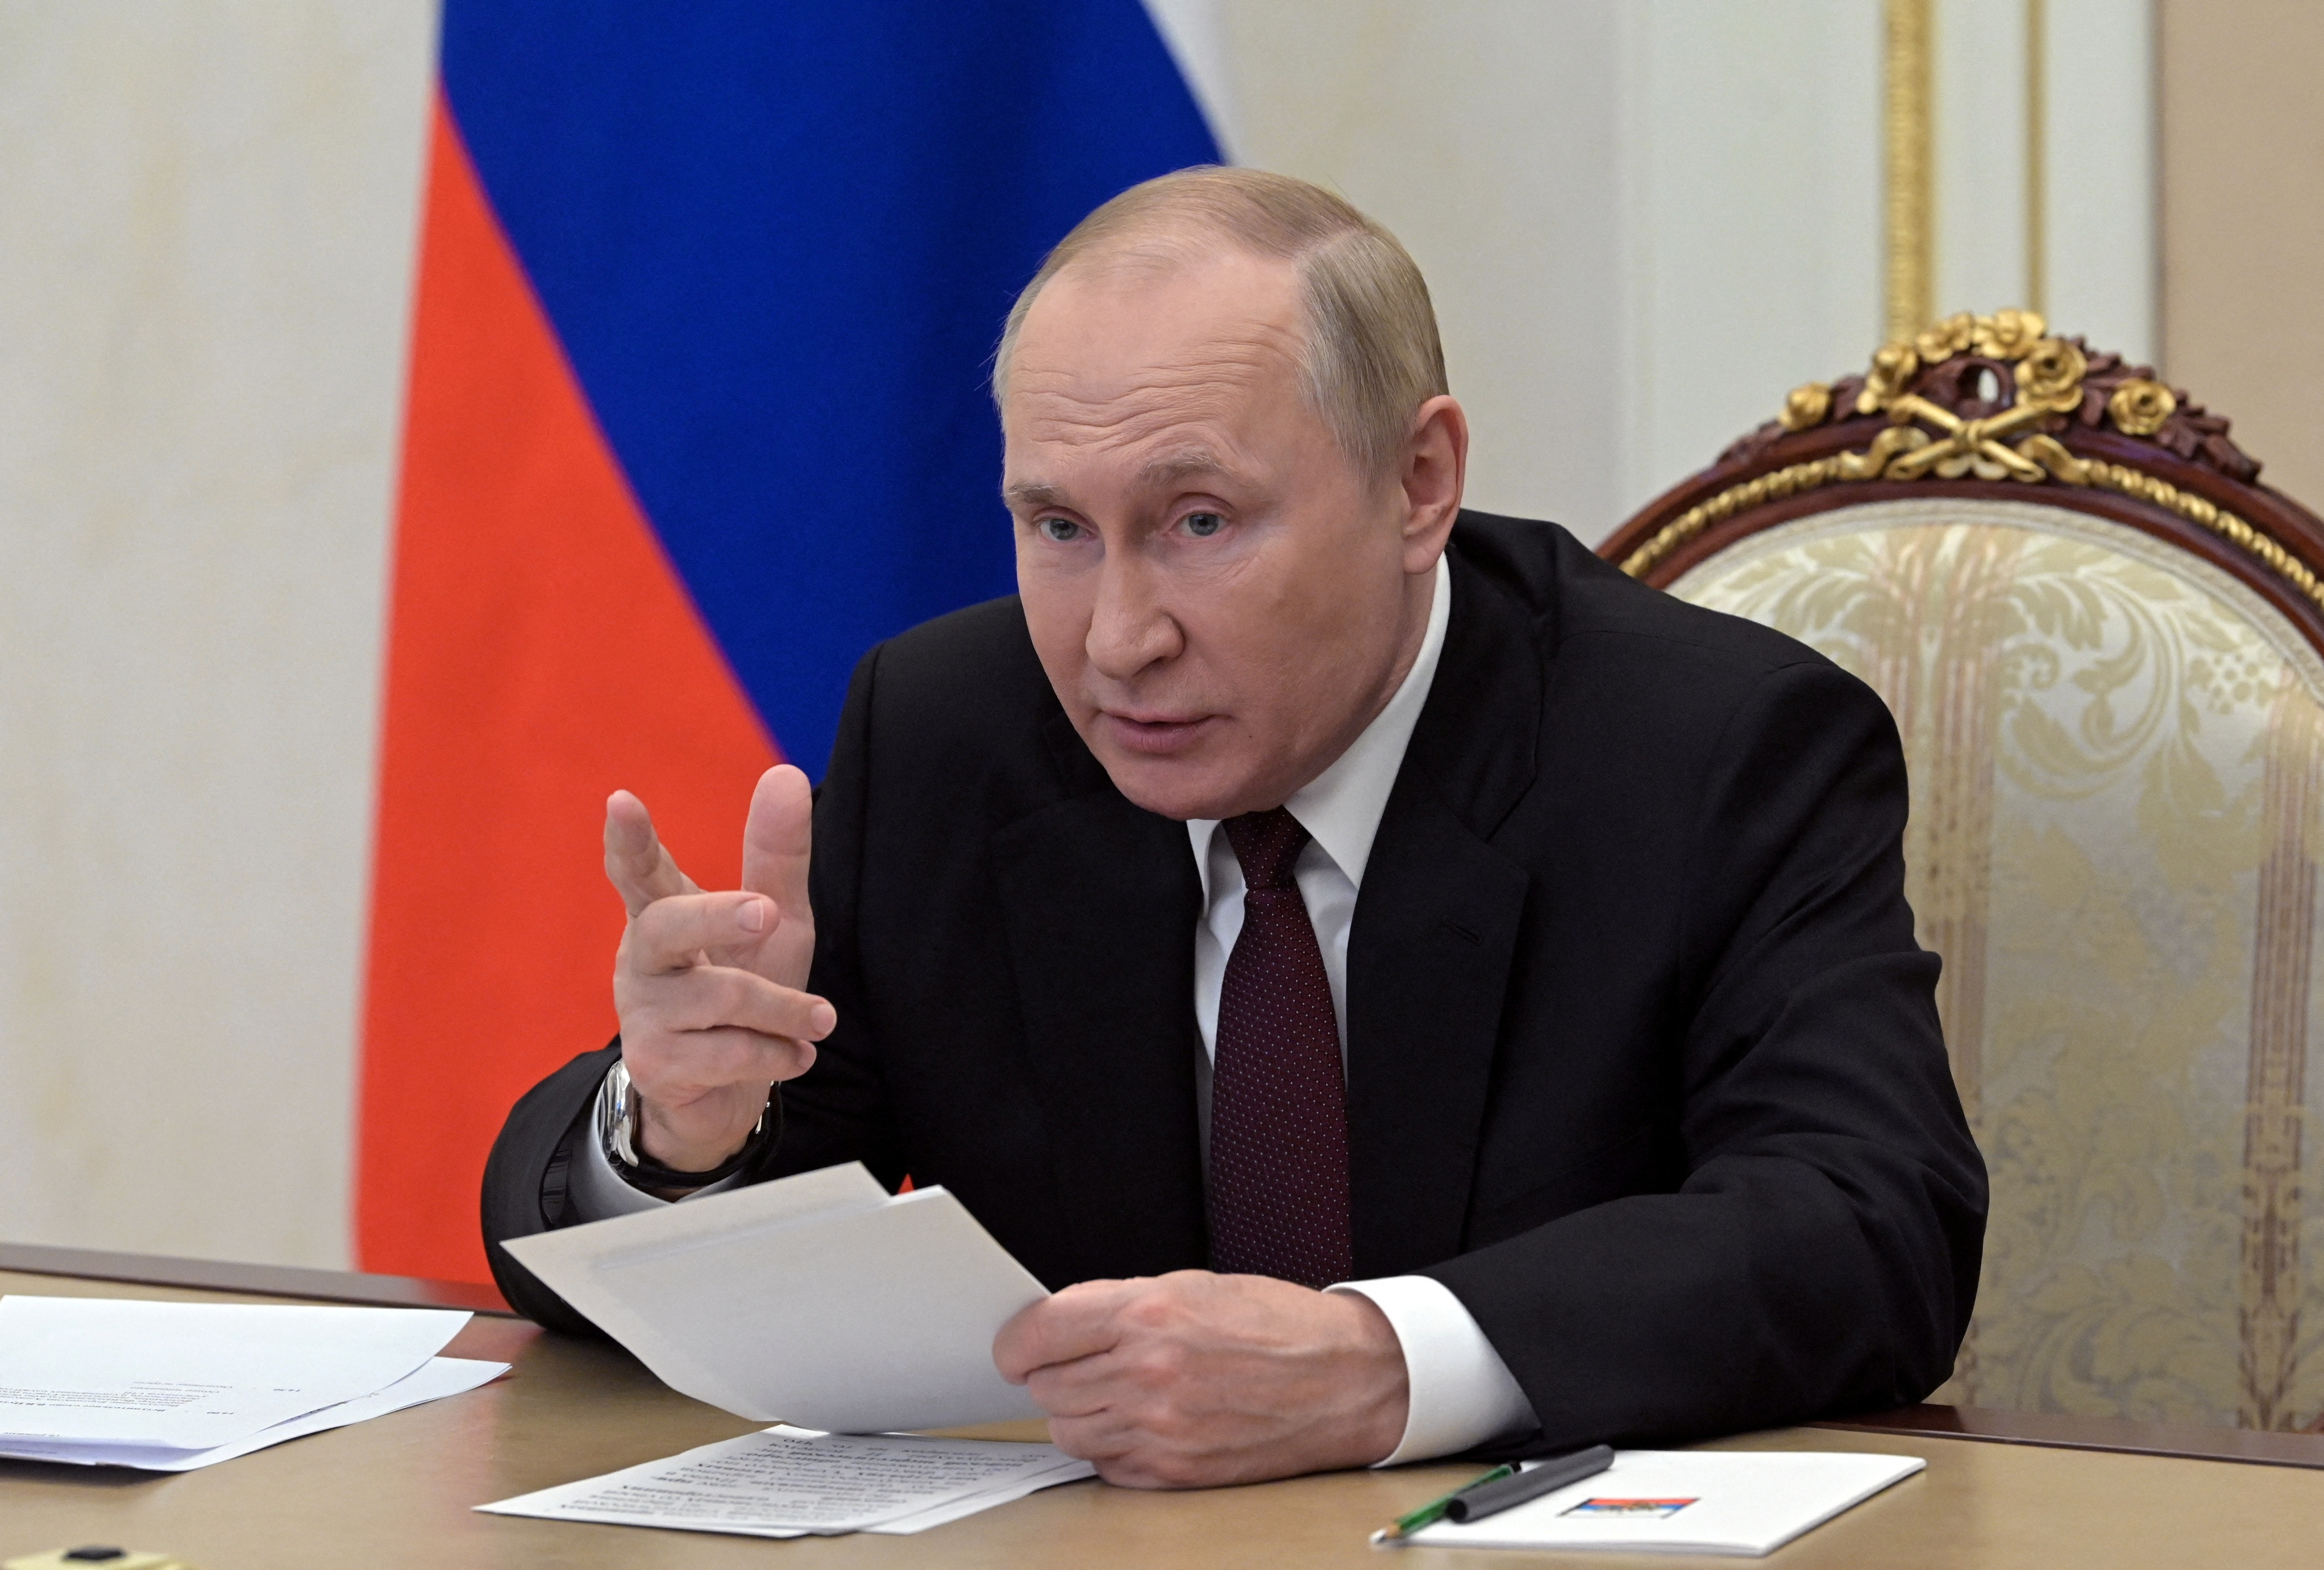 Russian President Putin addresses heads of CIS states' security agencies via video link in Moscow